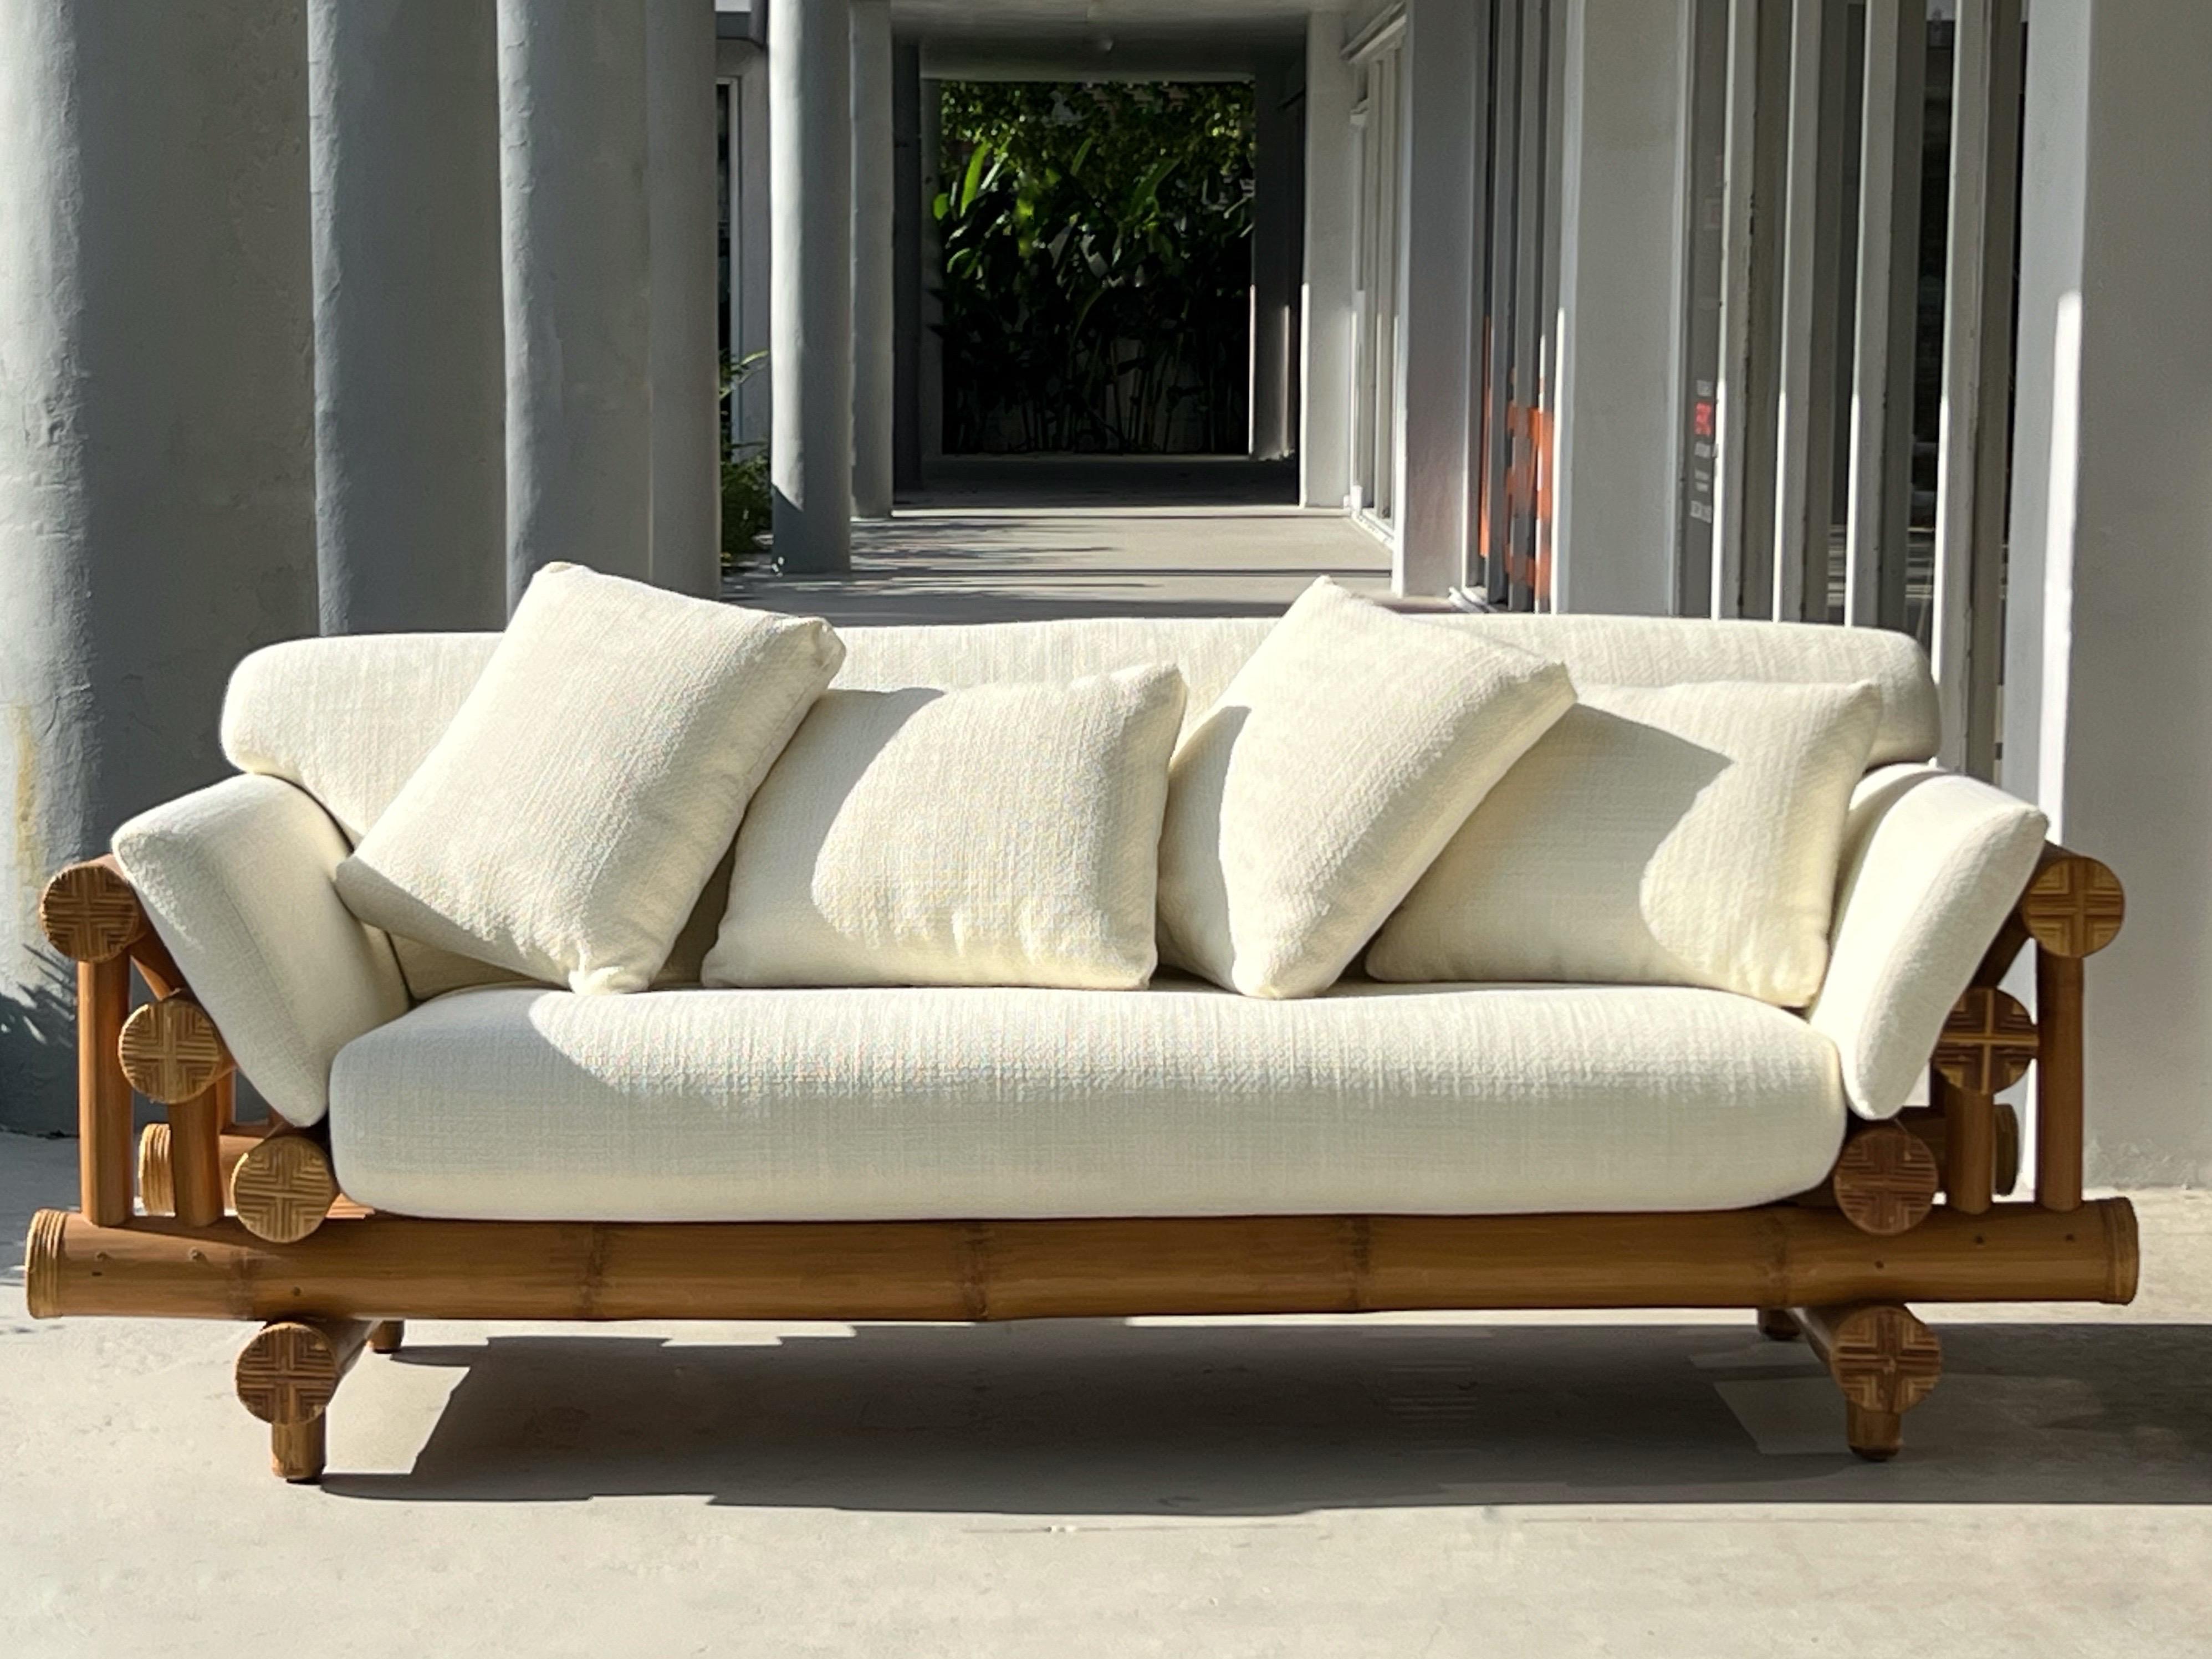 Upholstery Sculptural Bamboo Rattan Sofa 1970s For Sale